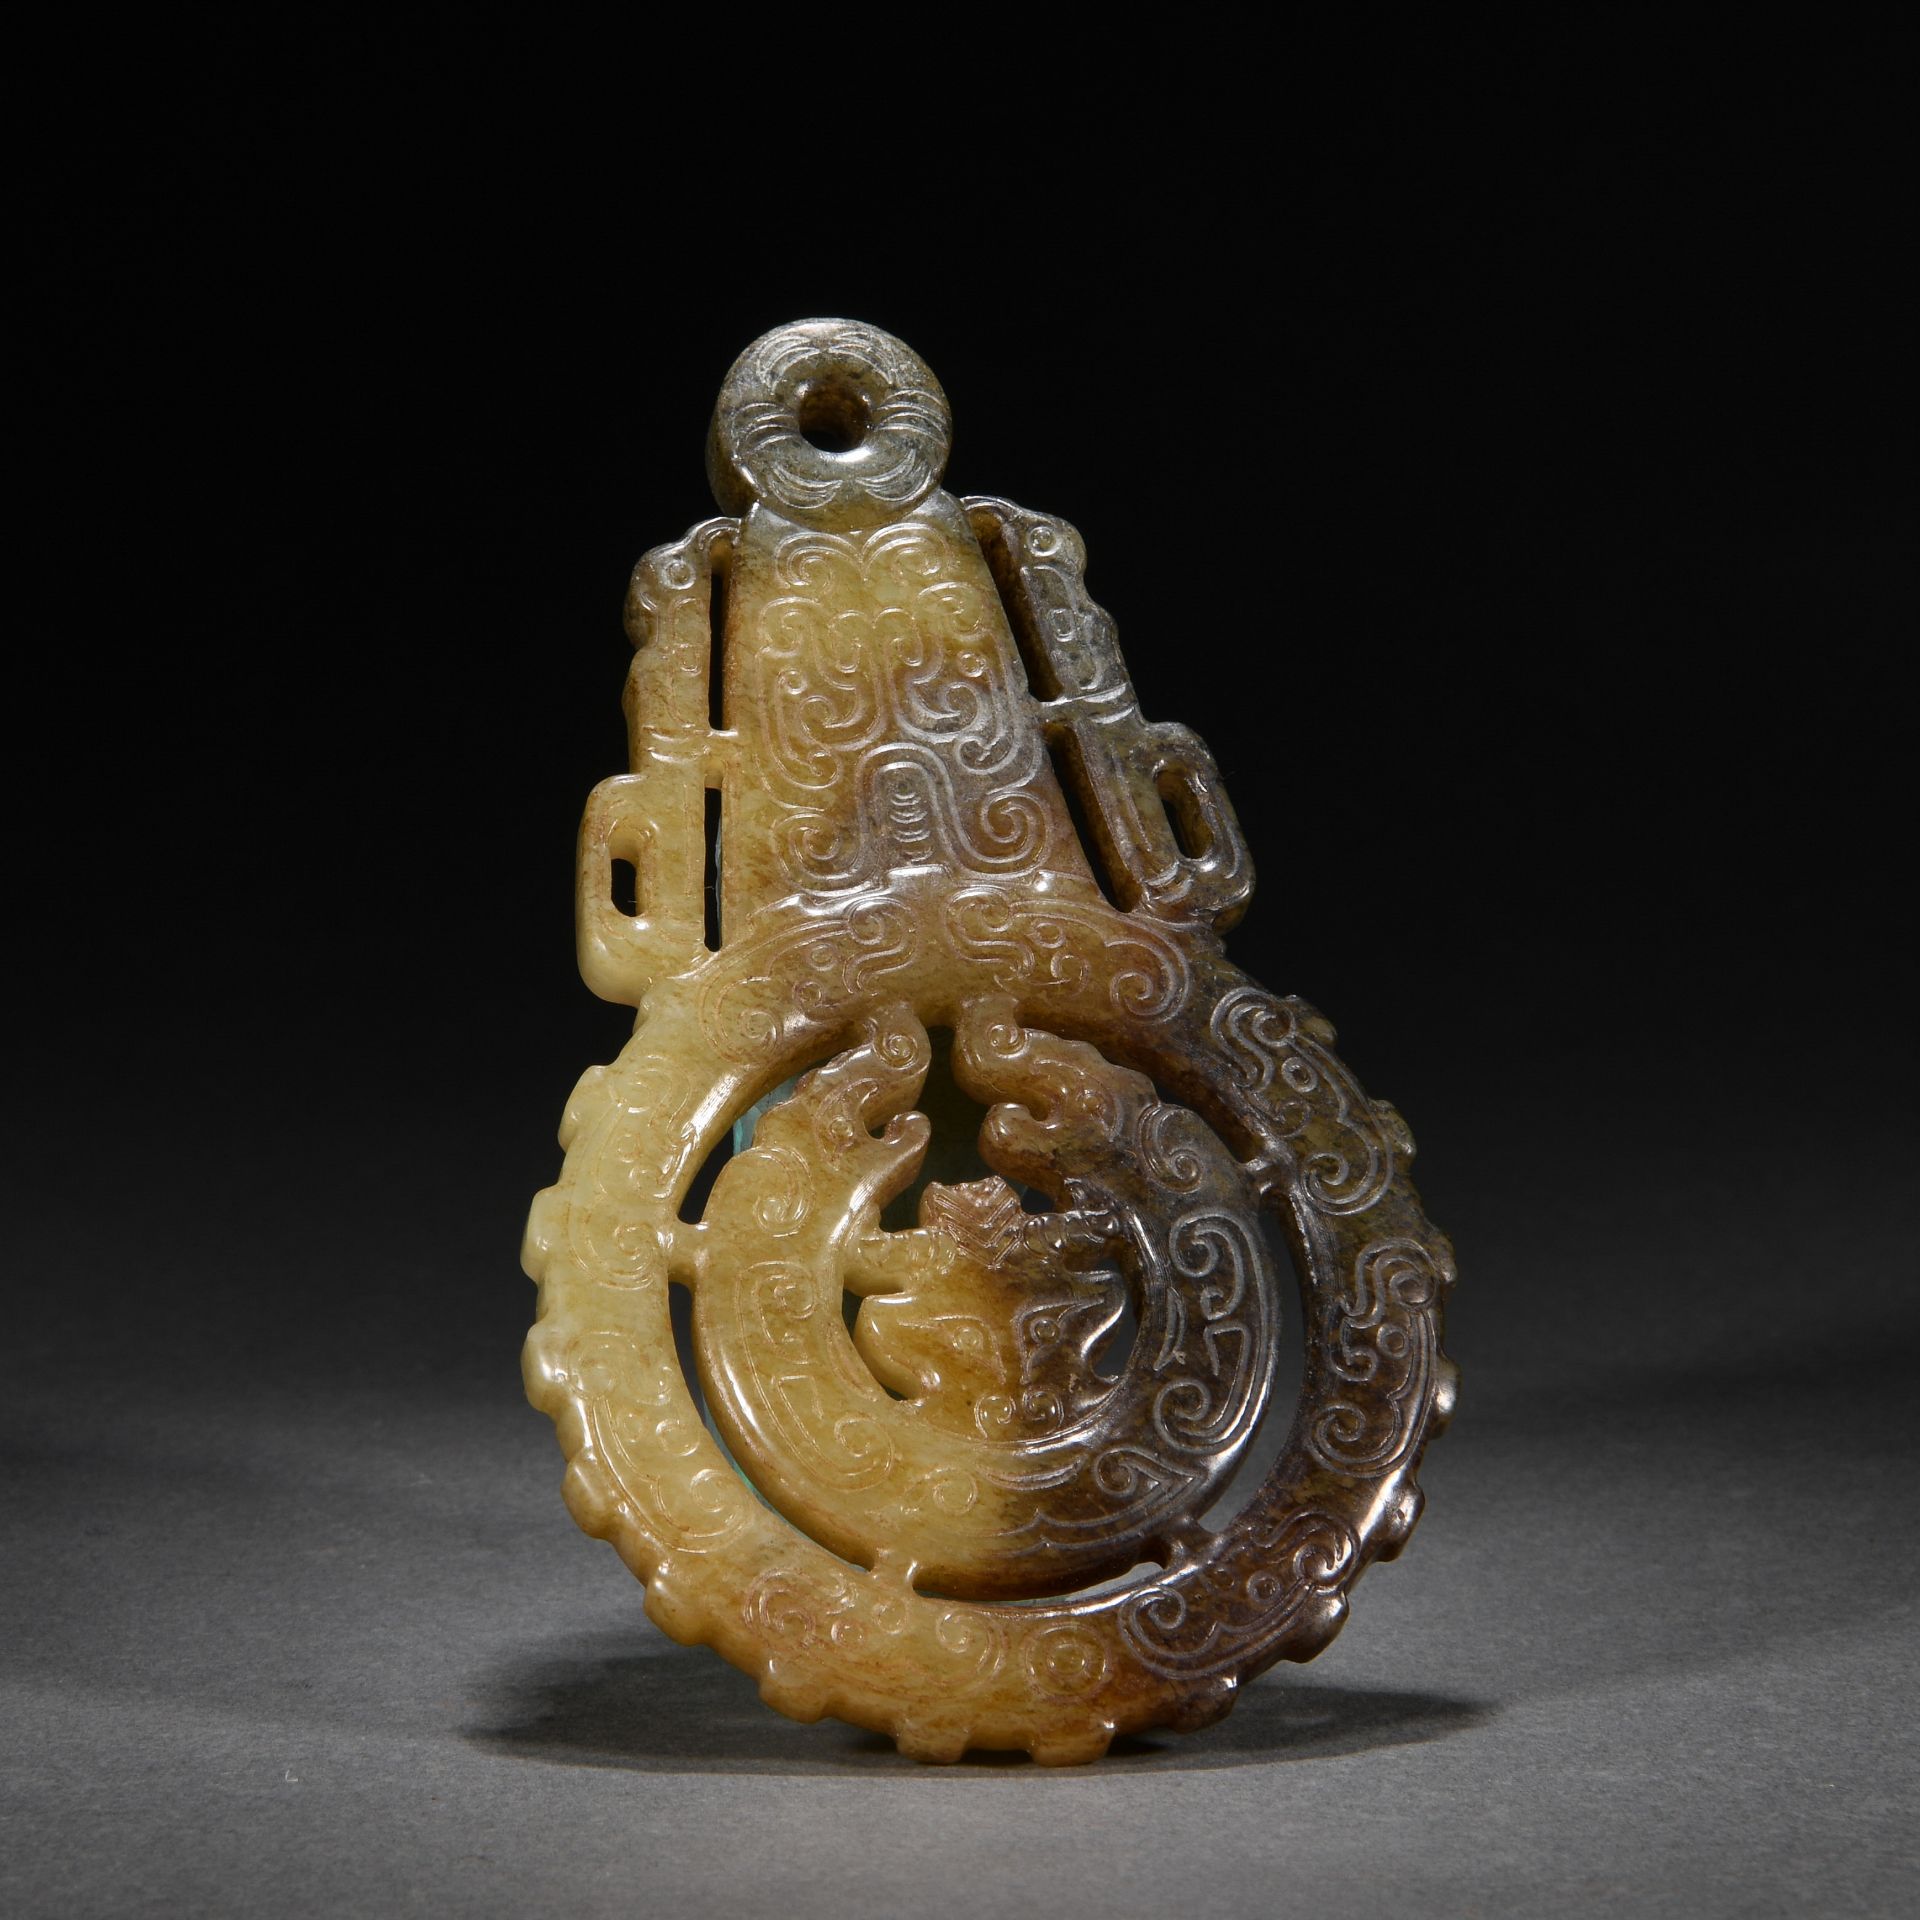 A Chinese Carved Jade Ornament - Image 5 of 8